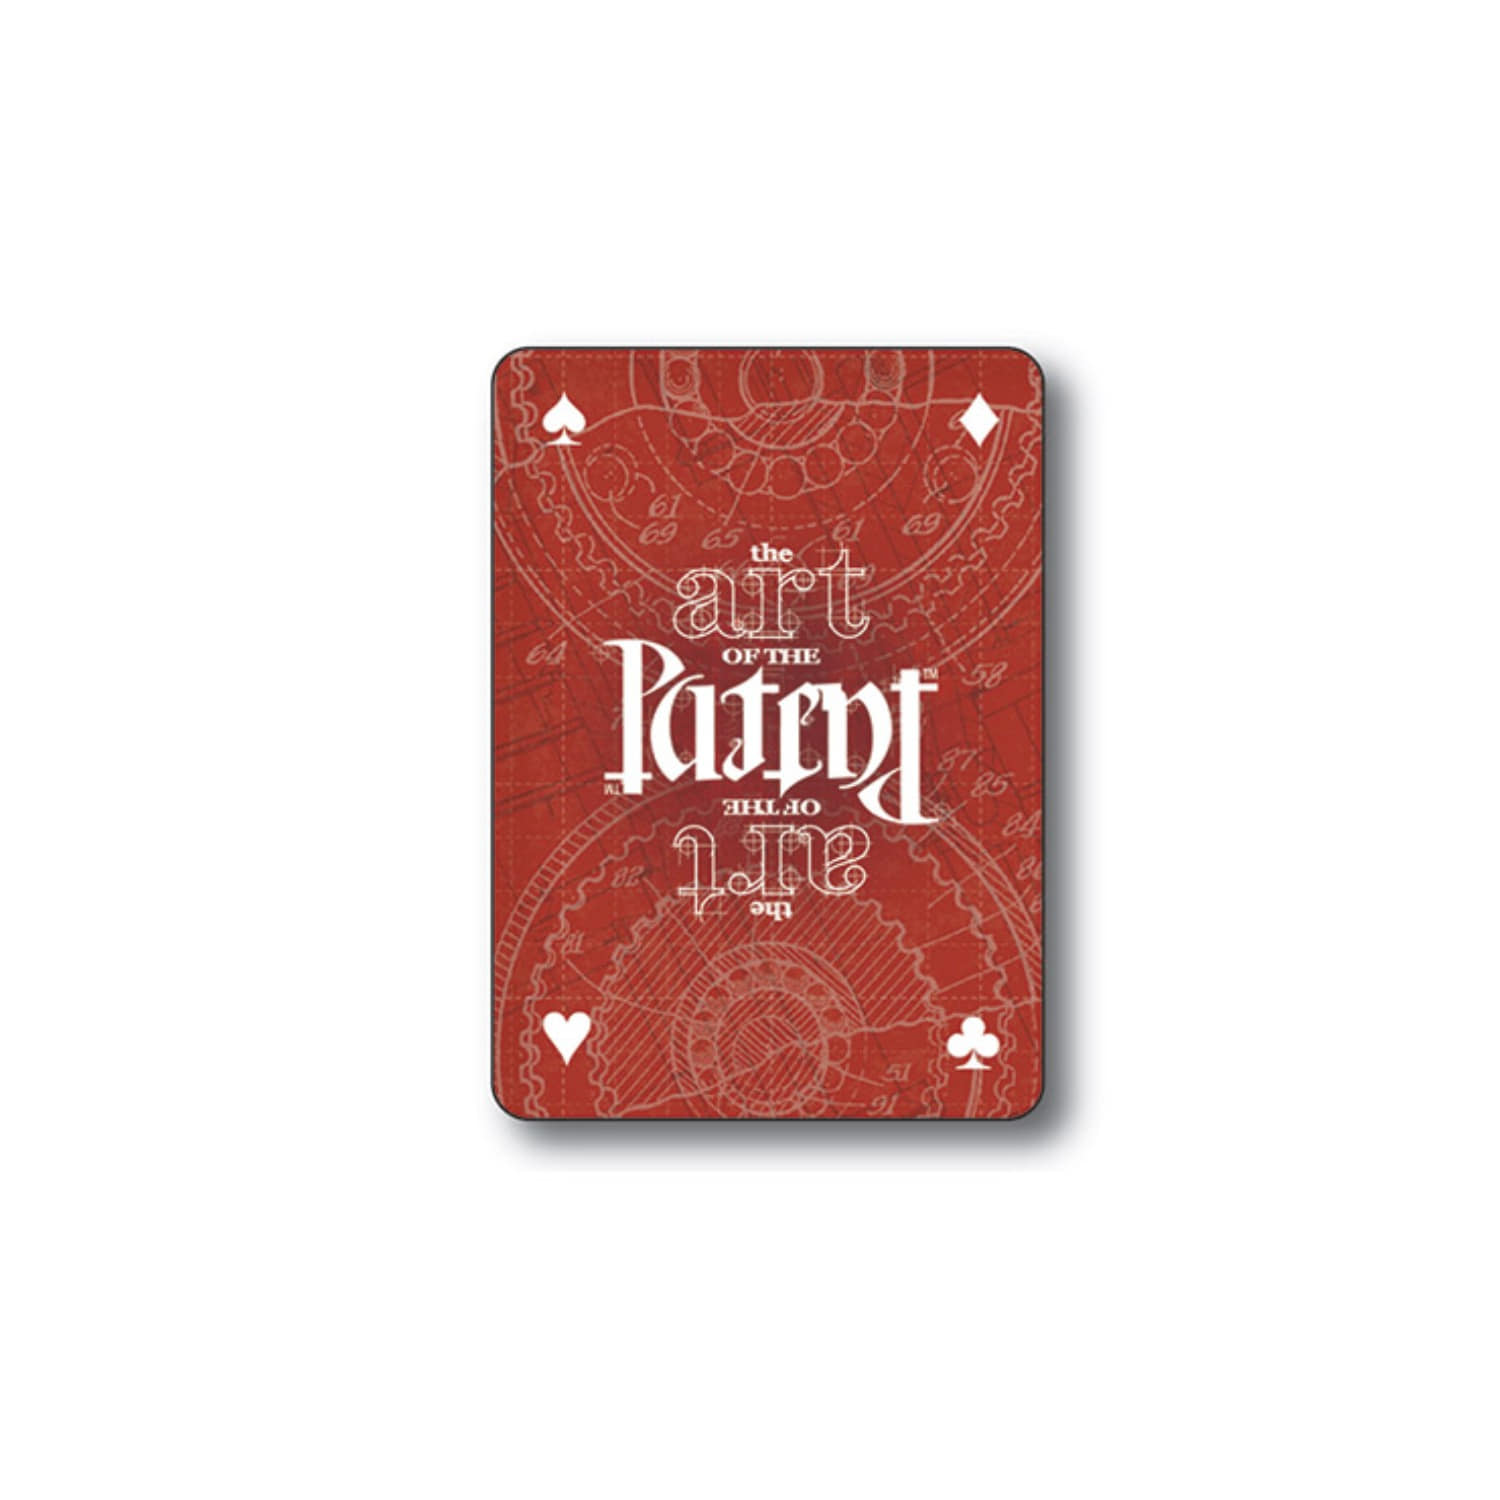 CA20 (한정판)페이머스 Limited Edition Art of the Patent (Famous) Playing Cards